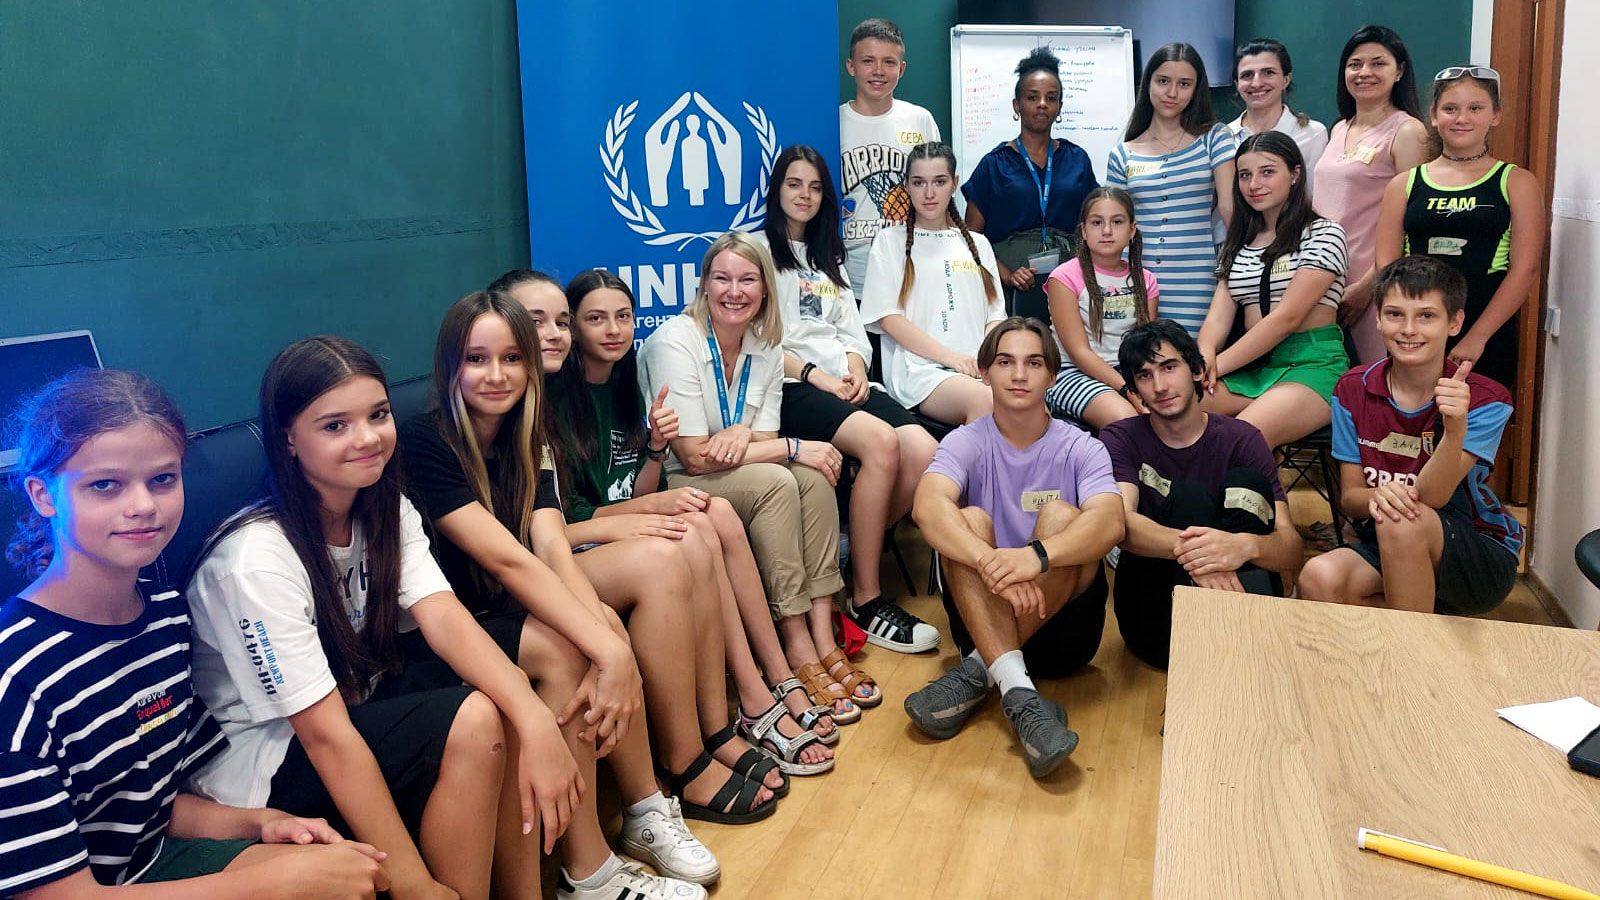 Karolina in a group photo with children at a youth center